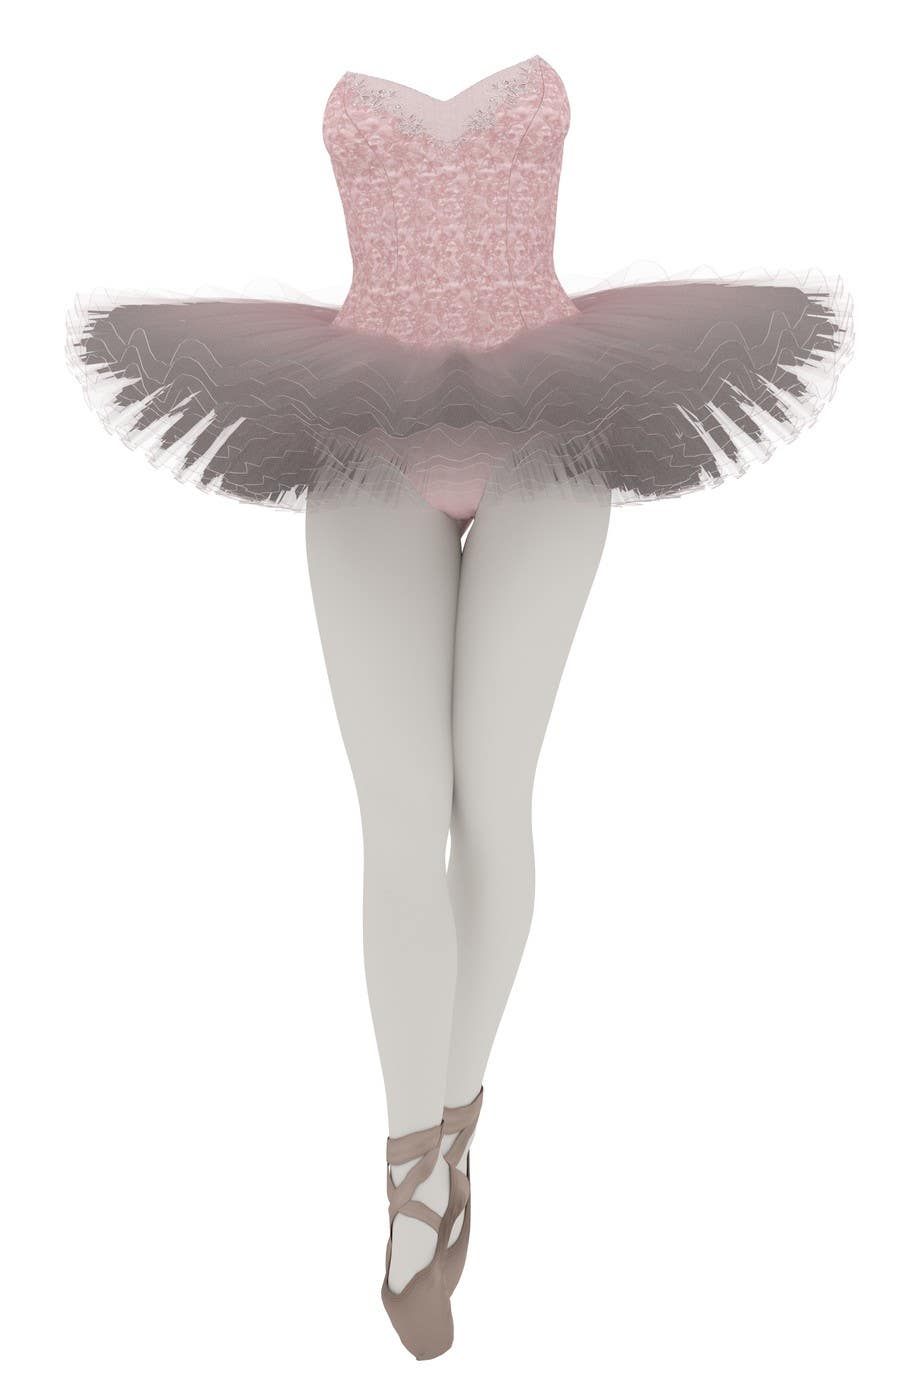 
                                                                                                                        Konkurrenceindlæg #                                            3
                                         for                                             Illustrate a realistic ballet dancer costume and legs for printing
                                        